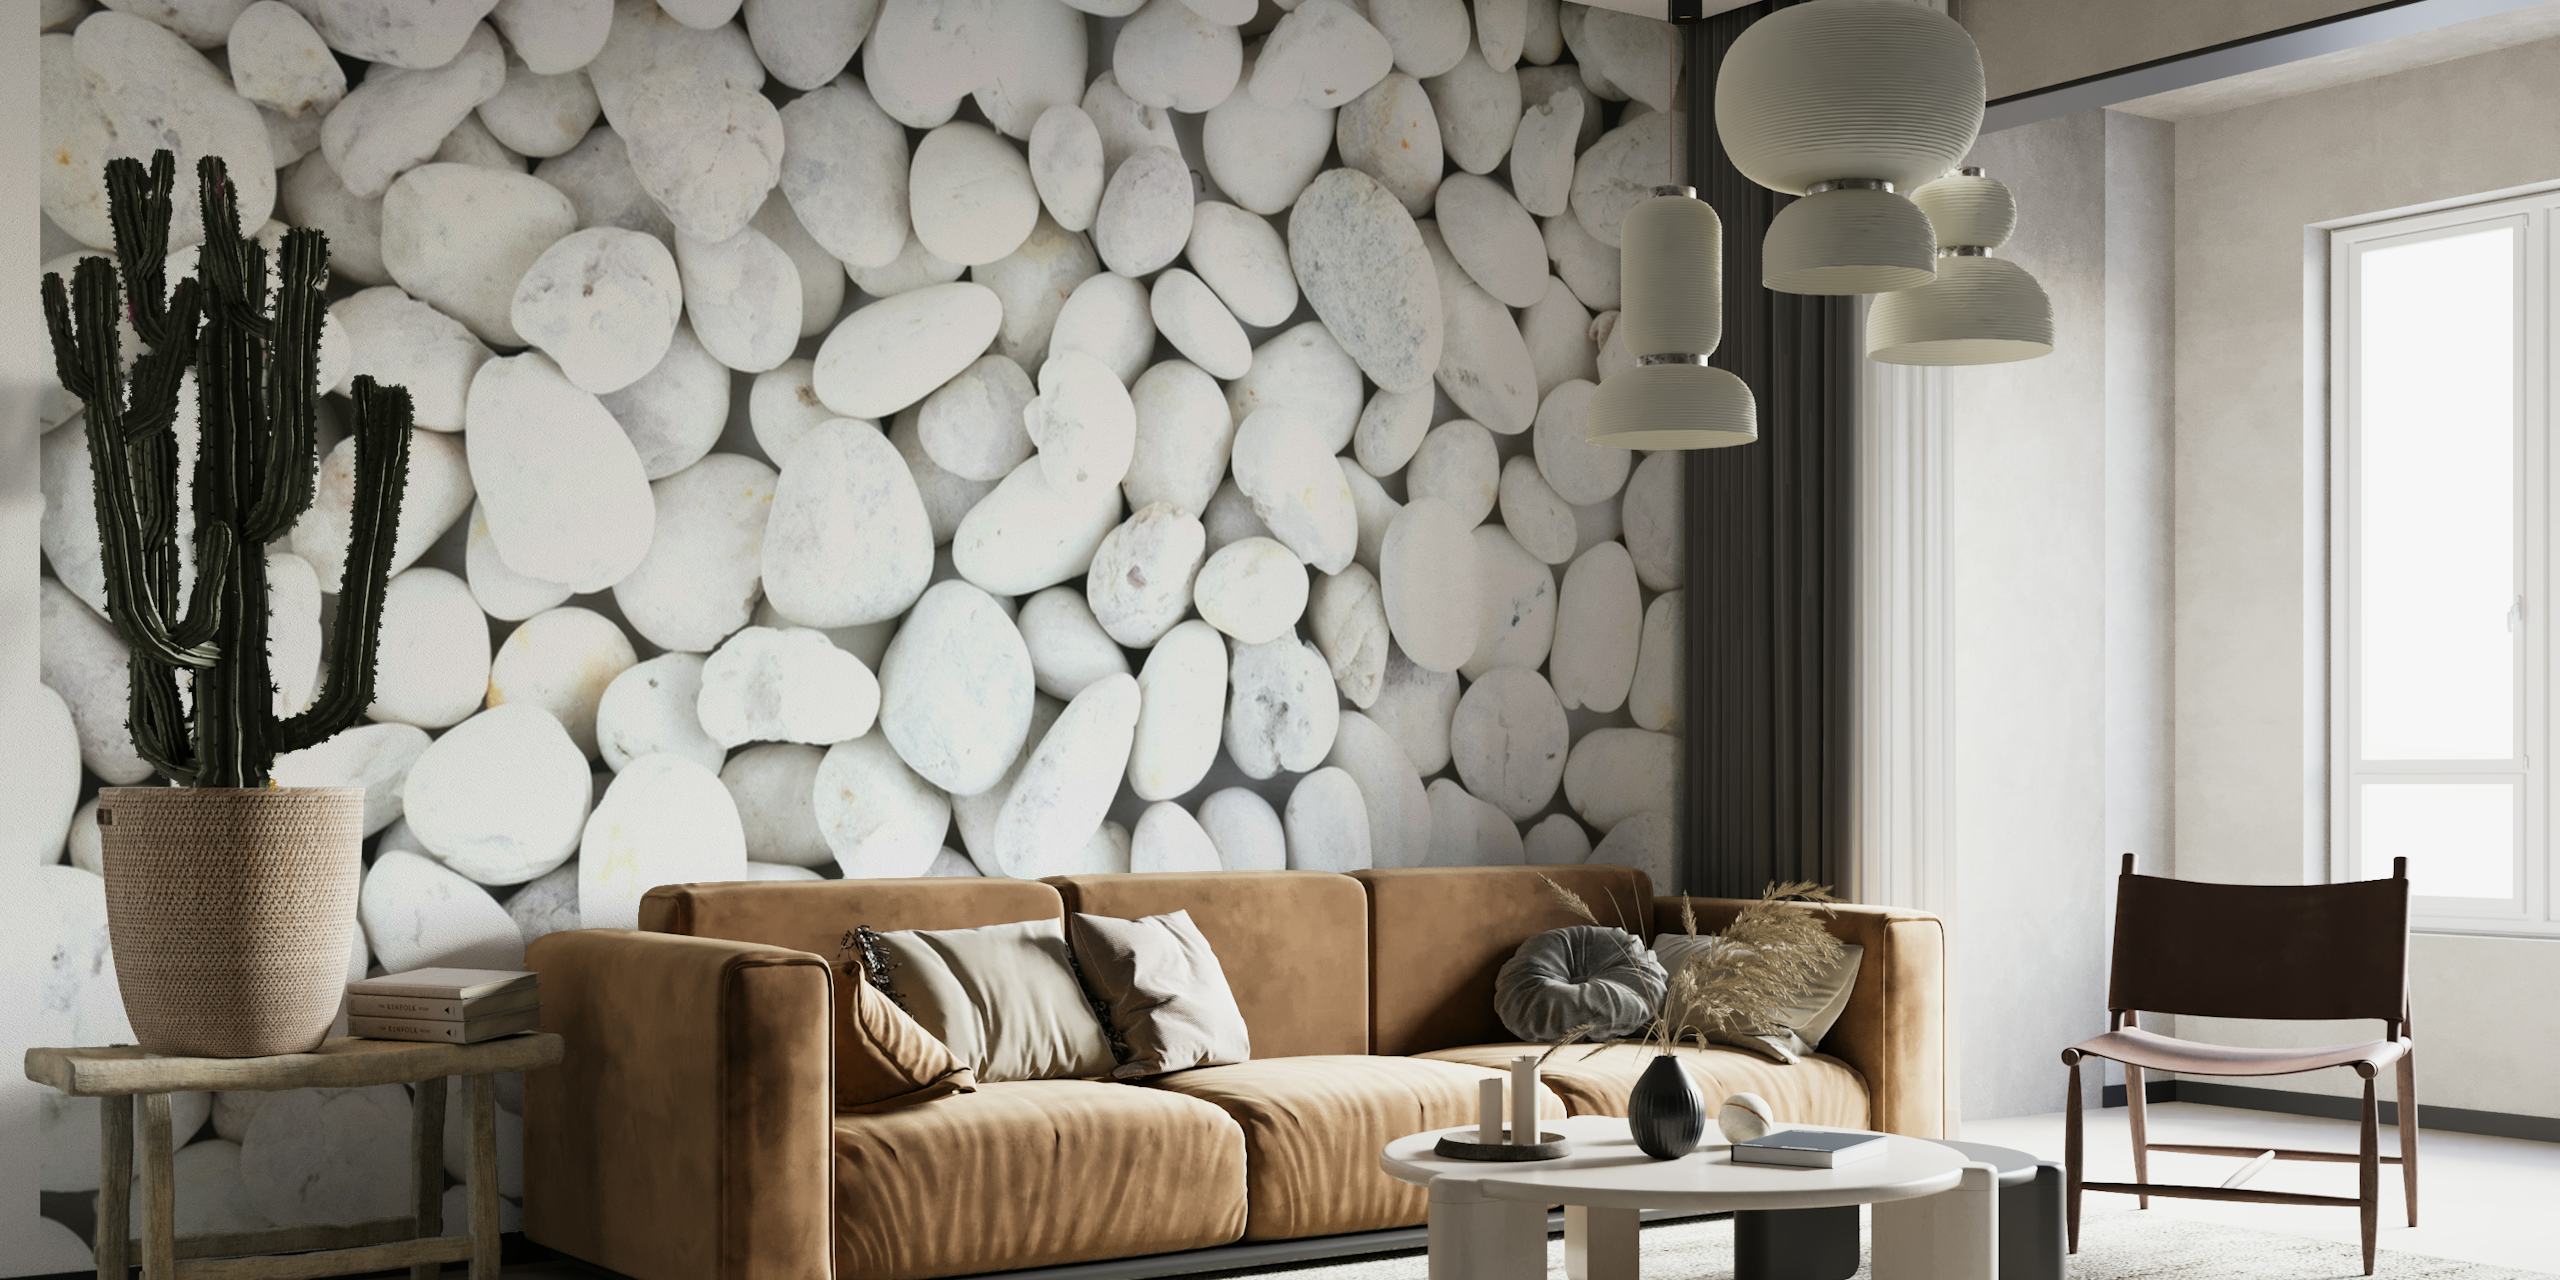 Wall mural of smooth white pebbles creating a tranquil, textured look